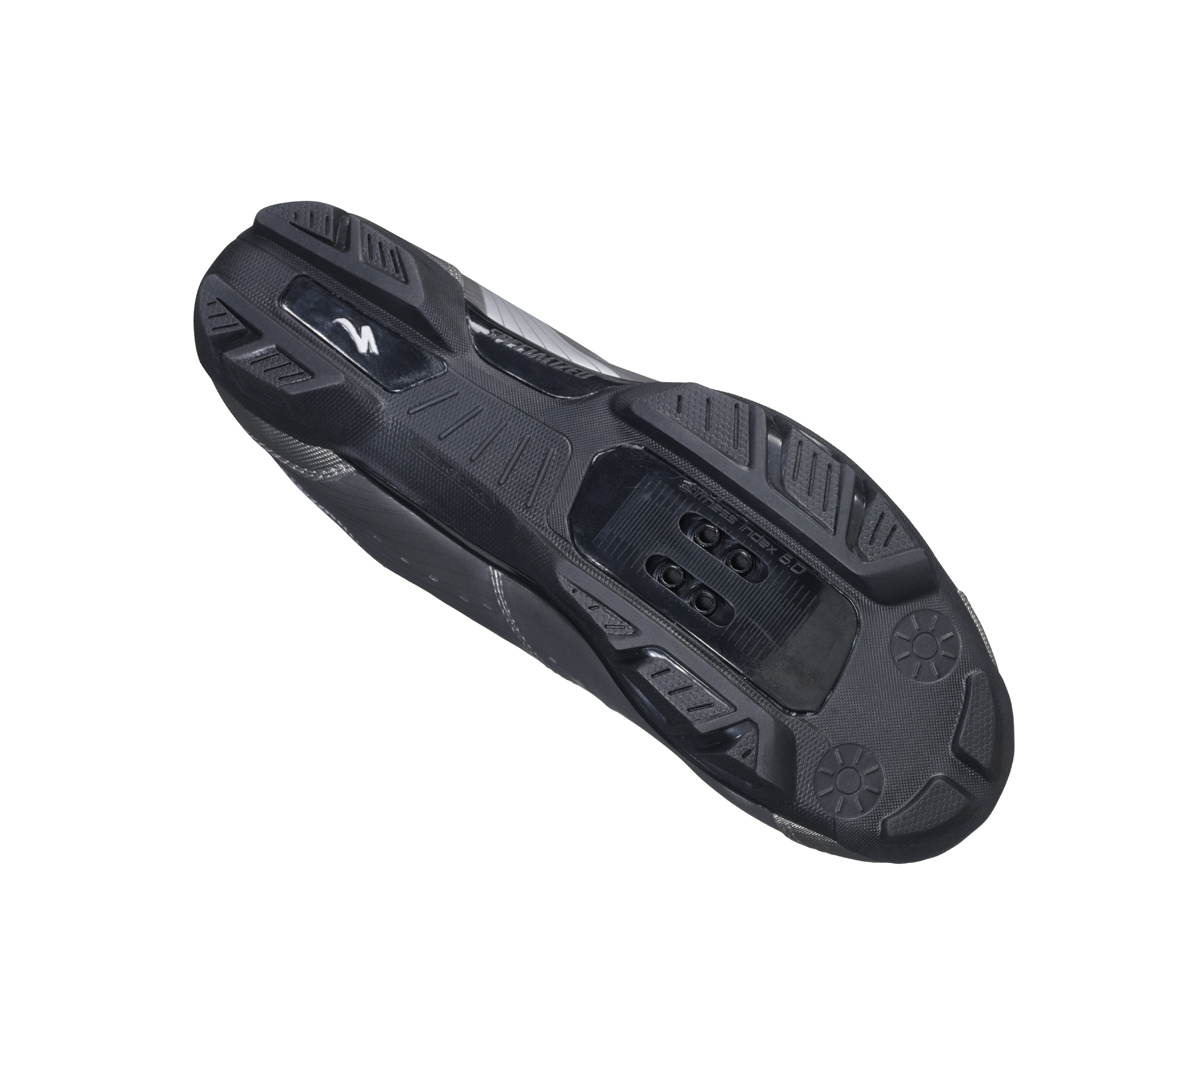 specialized riata cycling shoes